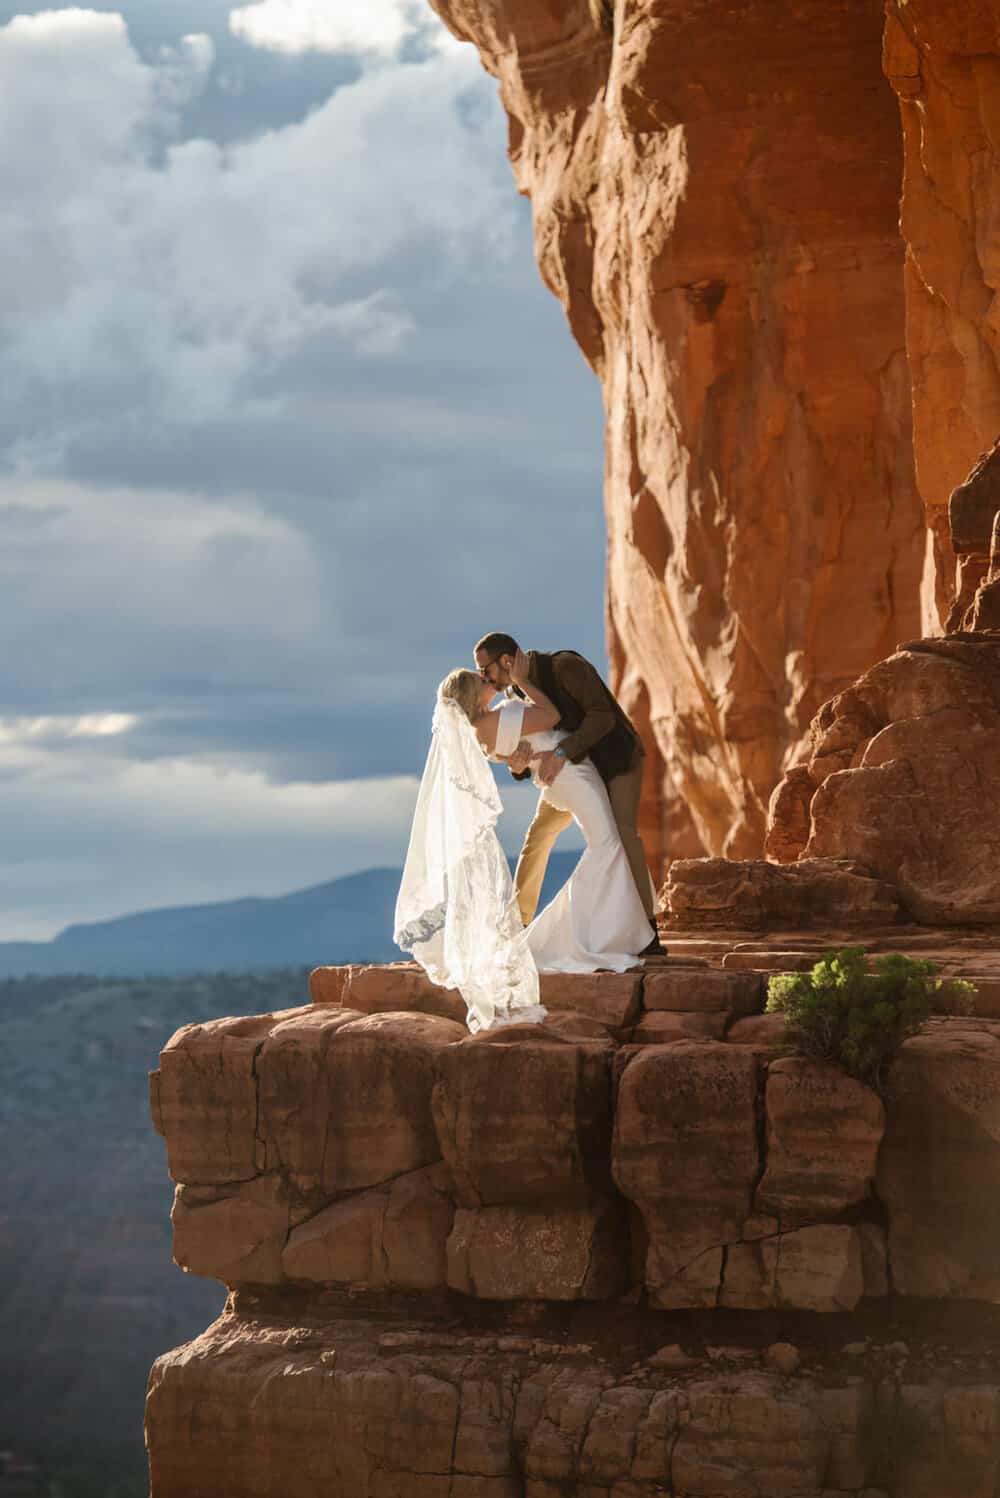 A wedding couple shares a dip kiss on a moody day at Cathedral Rock.